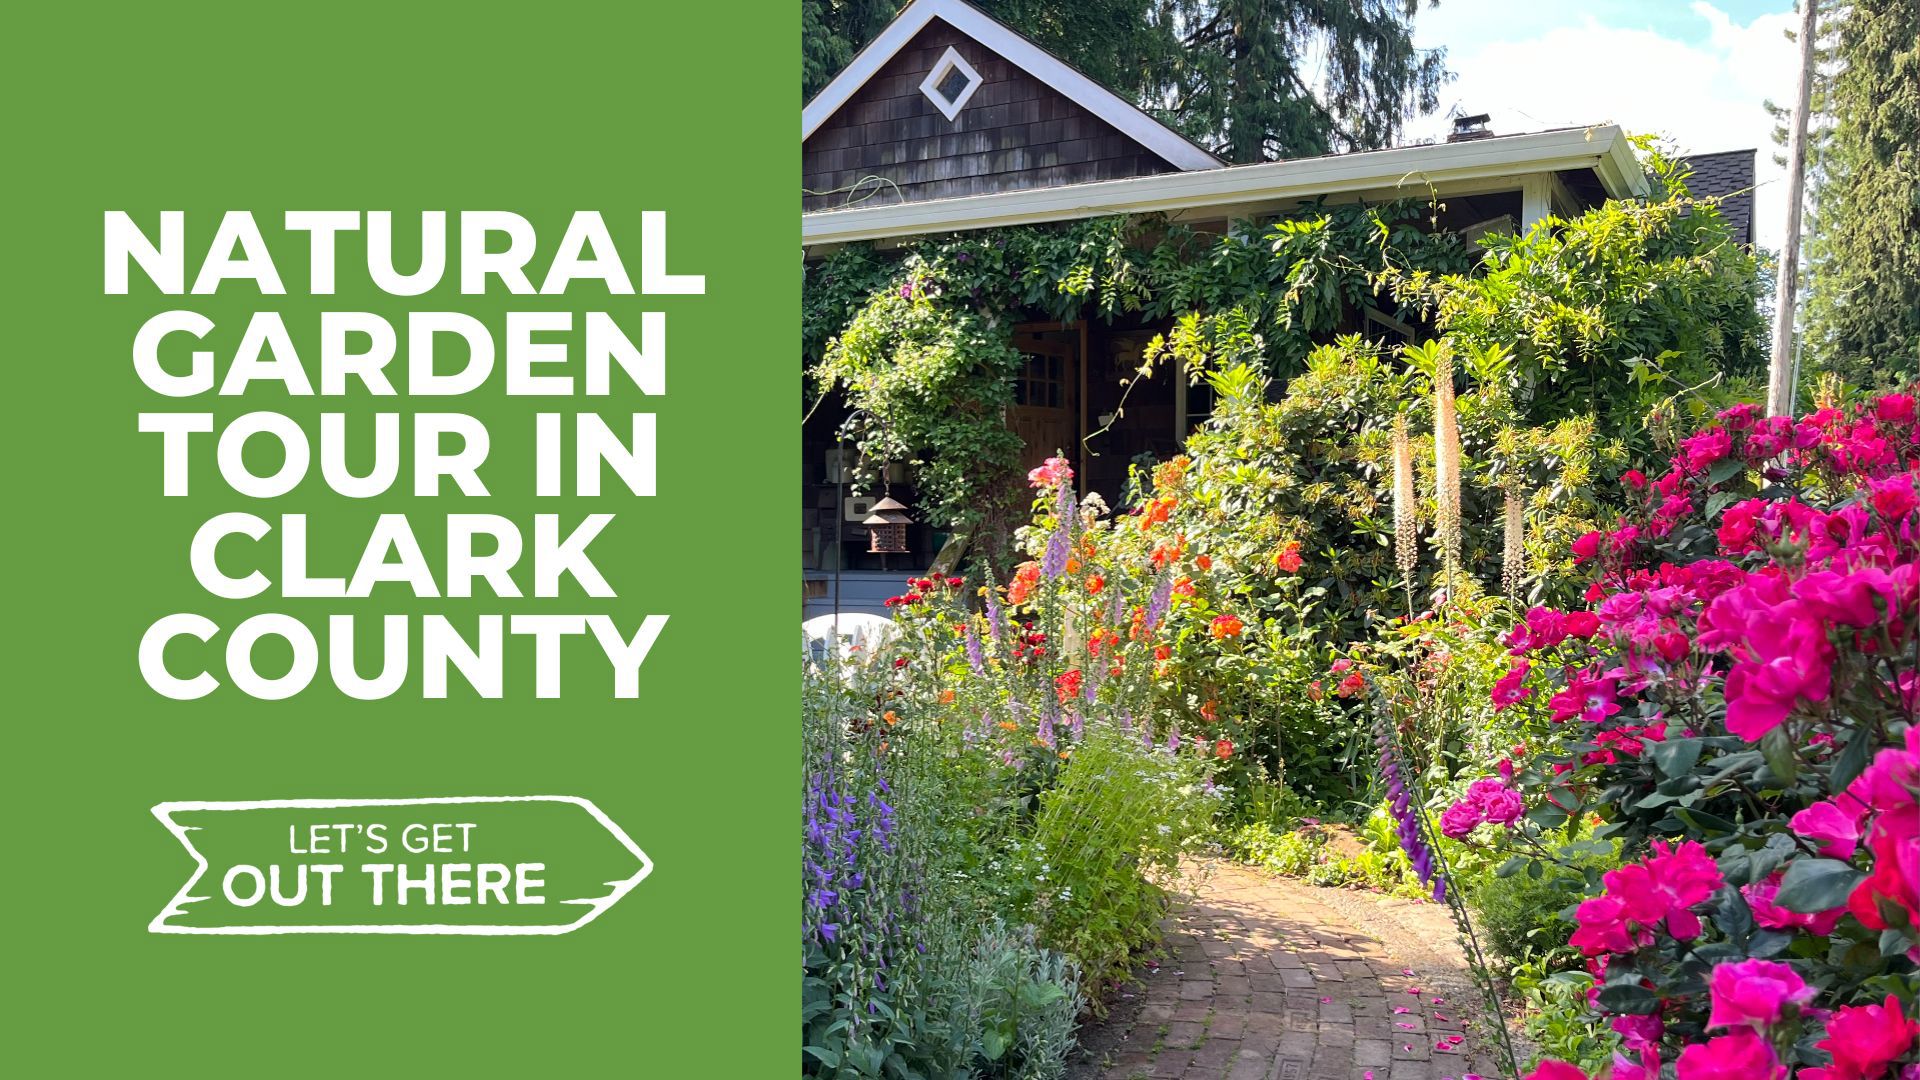 Gardeners can go on a self-guided tour, visiting nine natural gardens from Vancouver to Battleground to Washougal, this weekend.